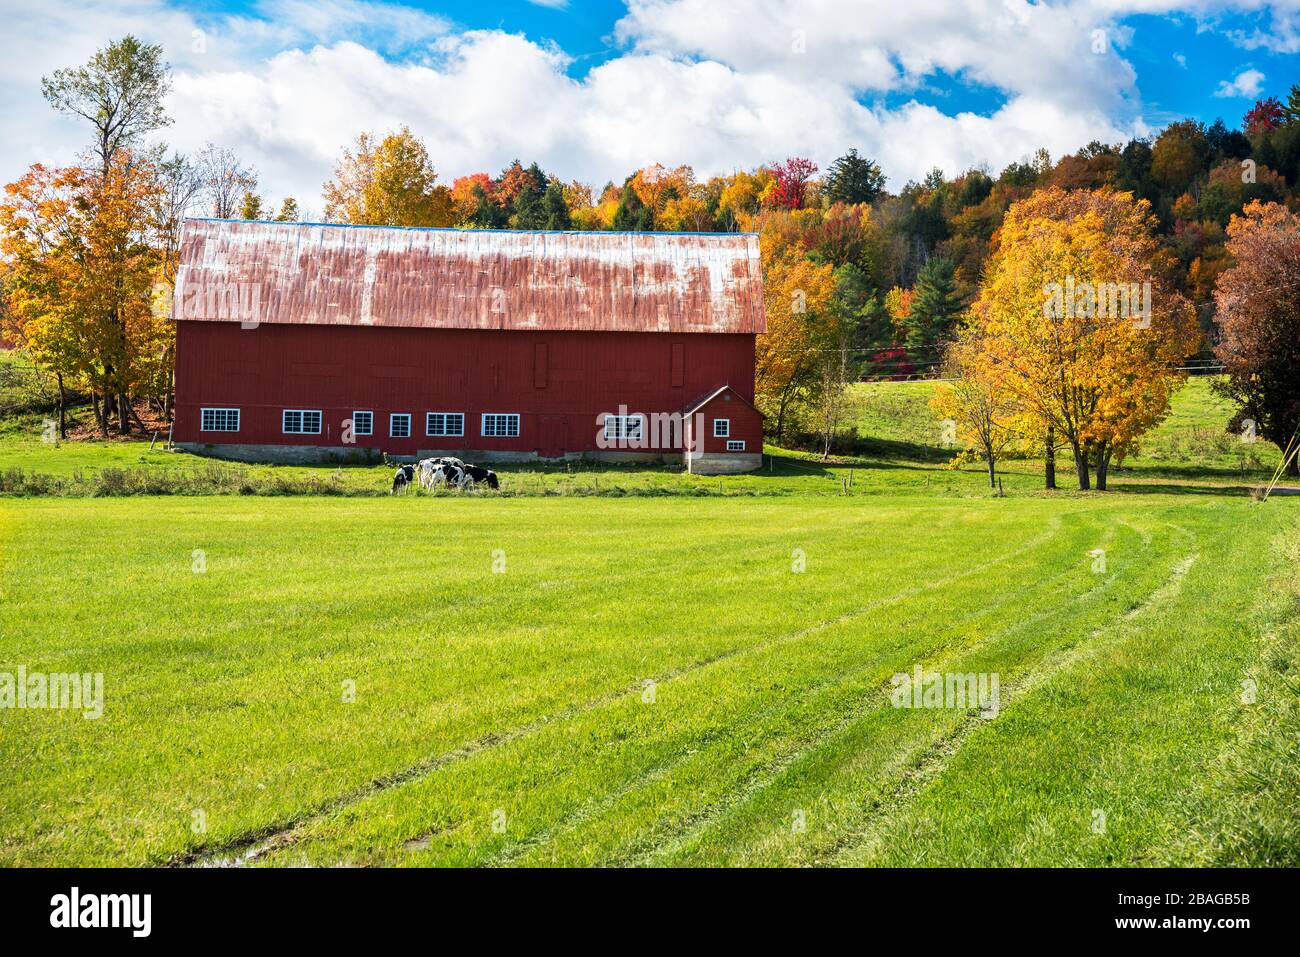 Red wooden barn at the far end of a field with colourful autumnal trees in background and blue sky. A herd of caow is grazing near the barn. Stock Photo